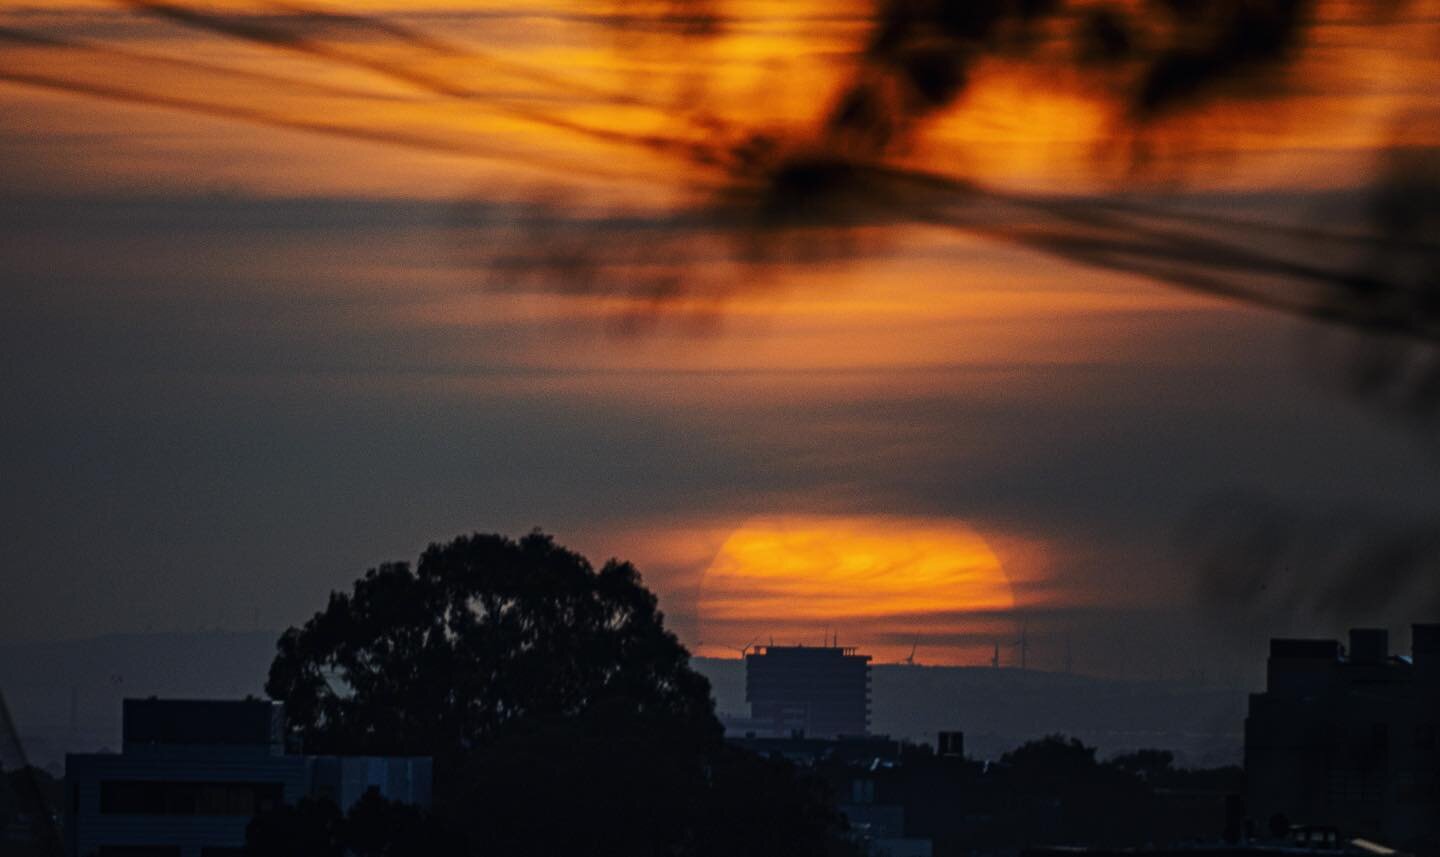 #sunset this evening from #Northcote ... #windfarms in the distance #Melbourne